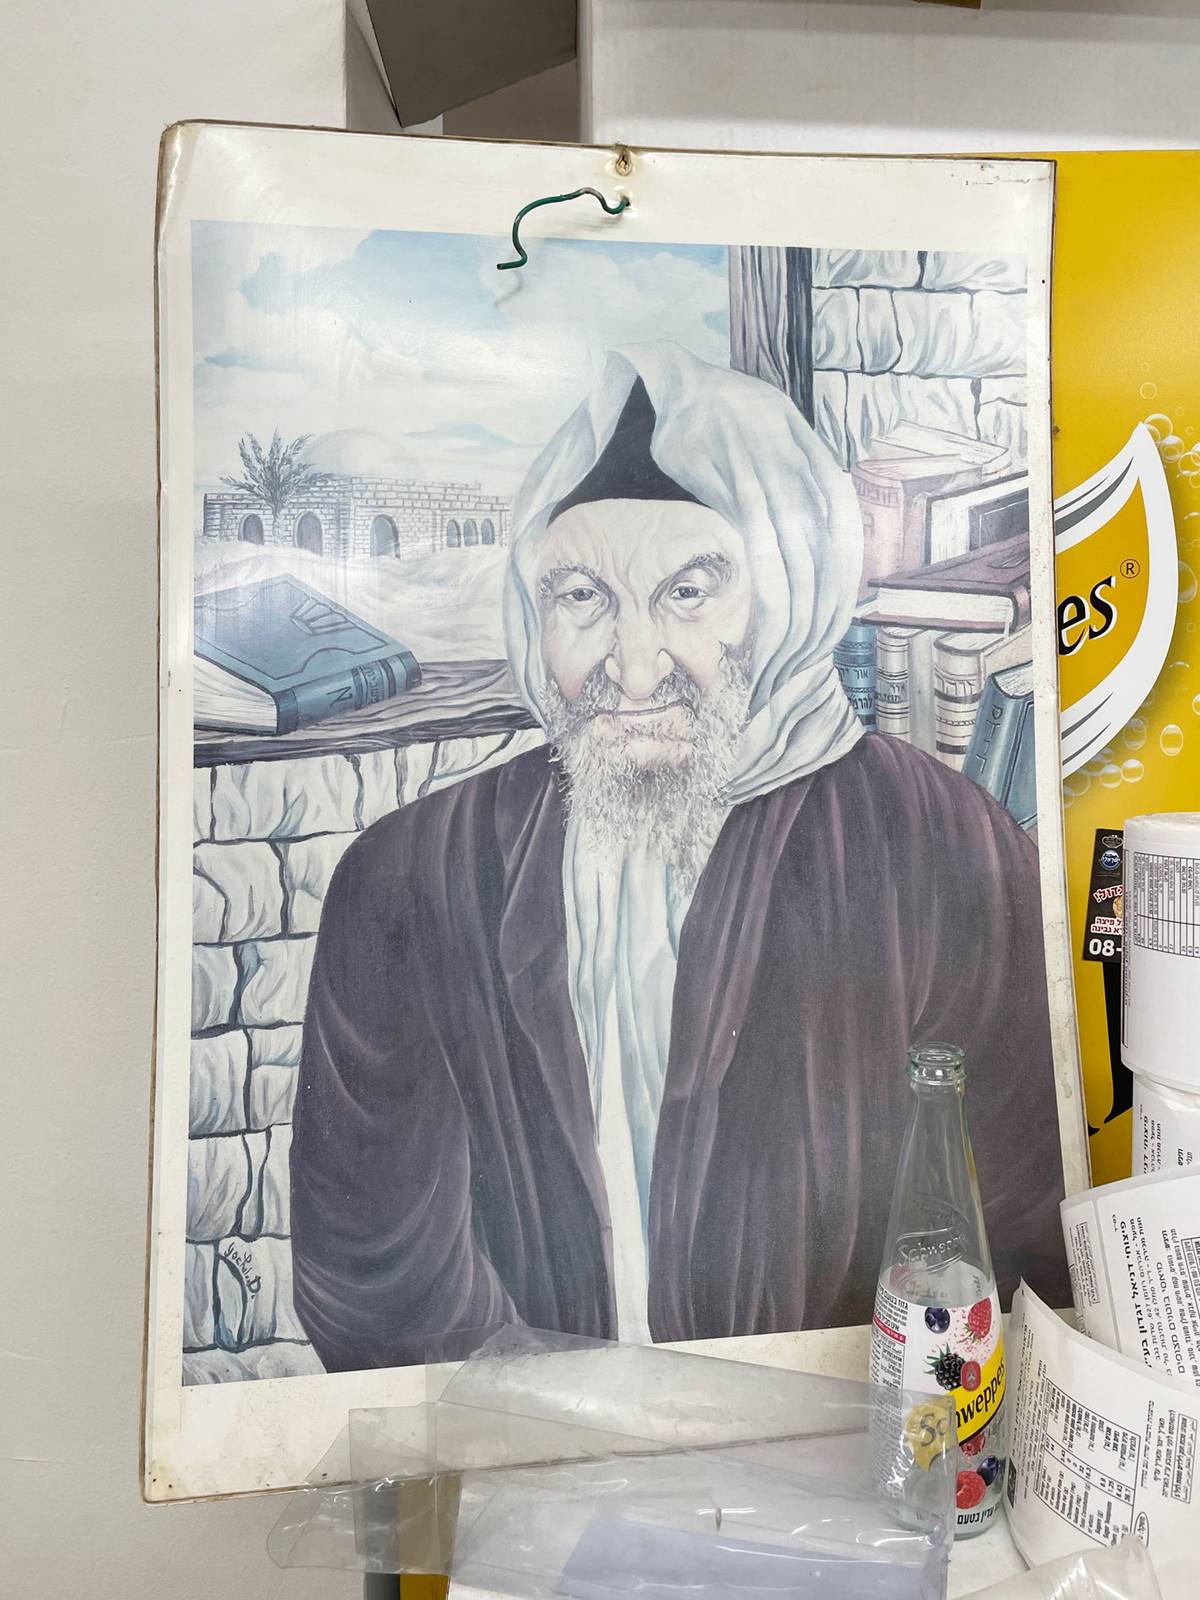 The Baba Sali gazes upon patrons at a store in Netivot